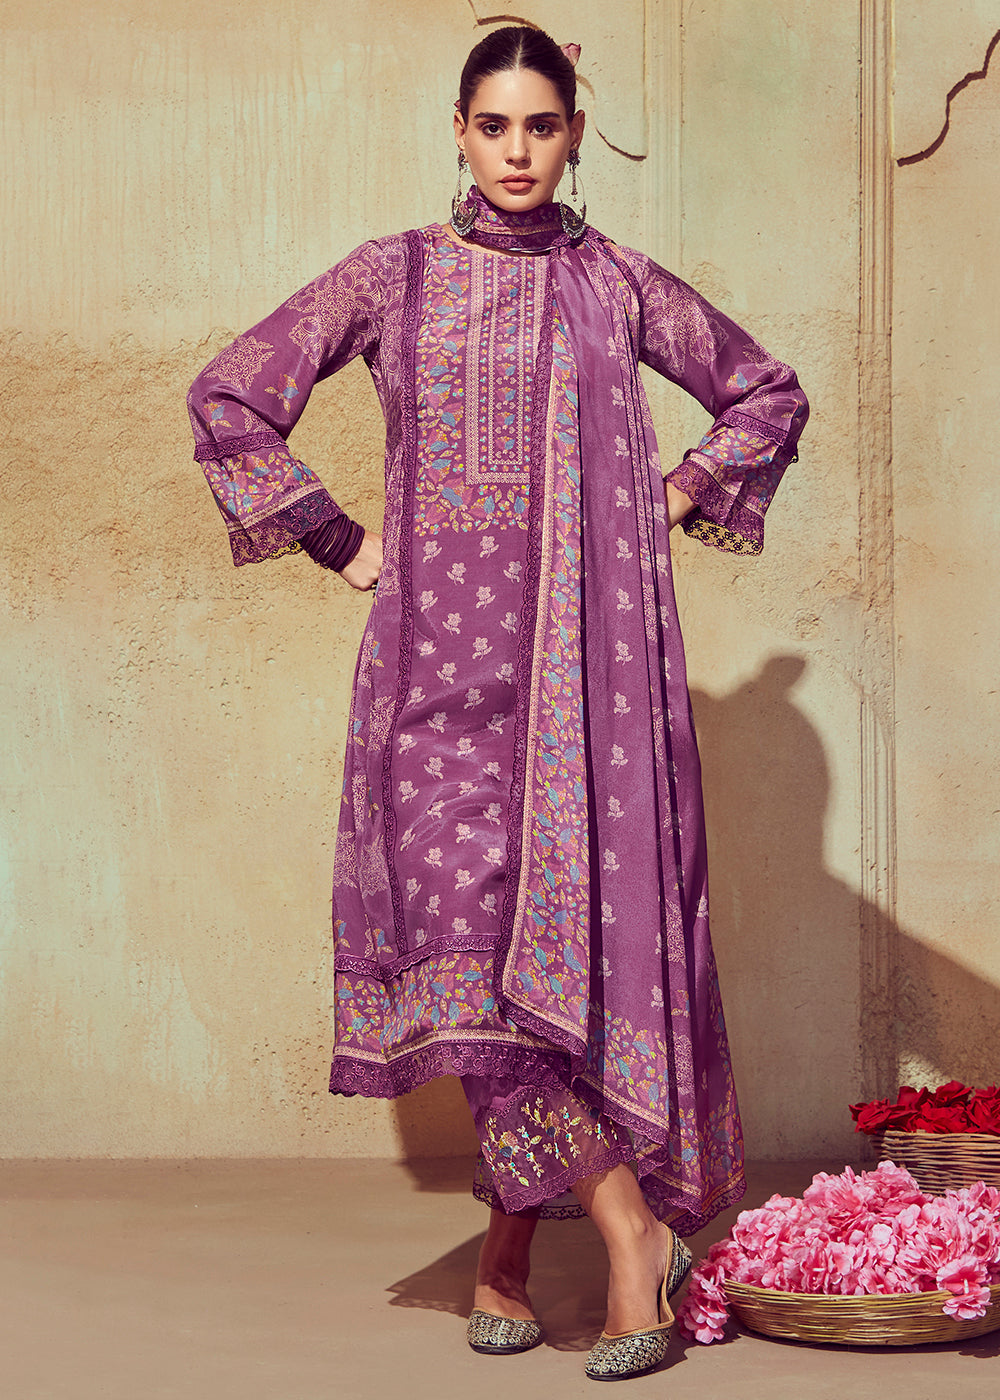 Buy Now Digital Printed & Embroidered Onion Pink Muslin Salwar Suit Online in USA, UK, Canada, Germany, Australia & Worldwide at Empress Clothing. 